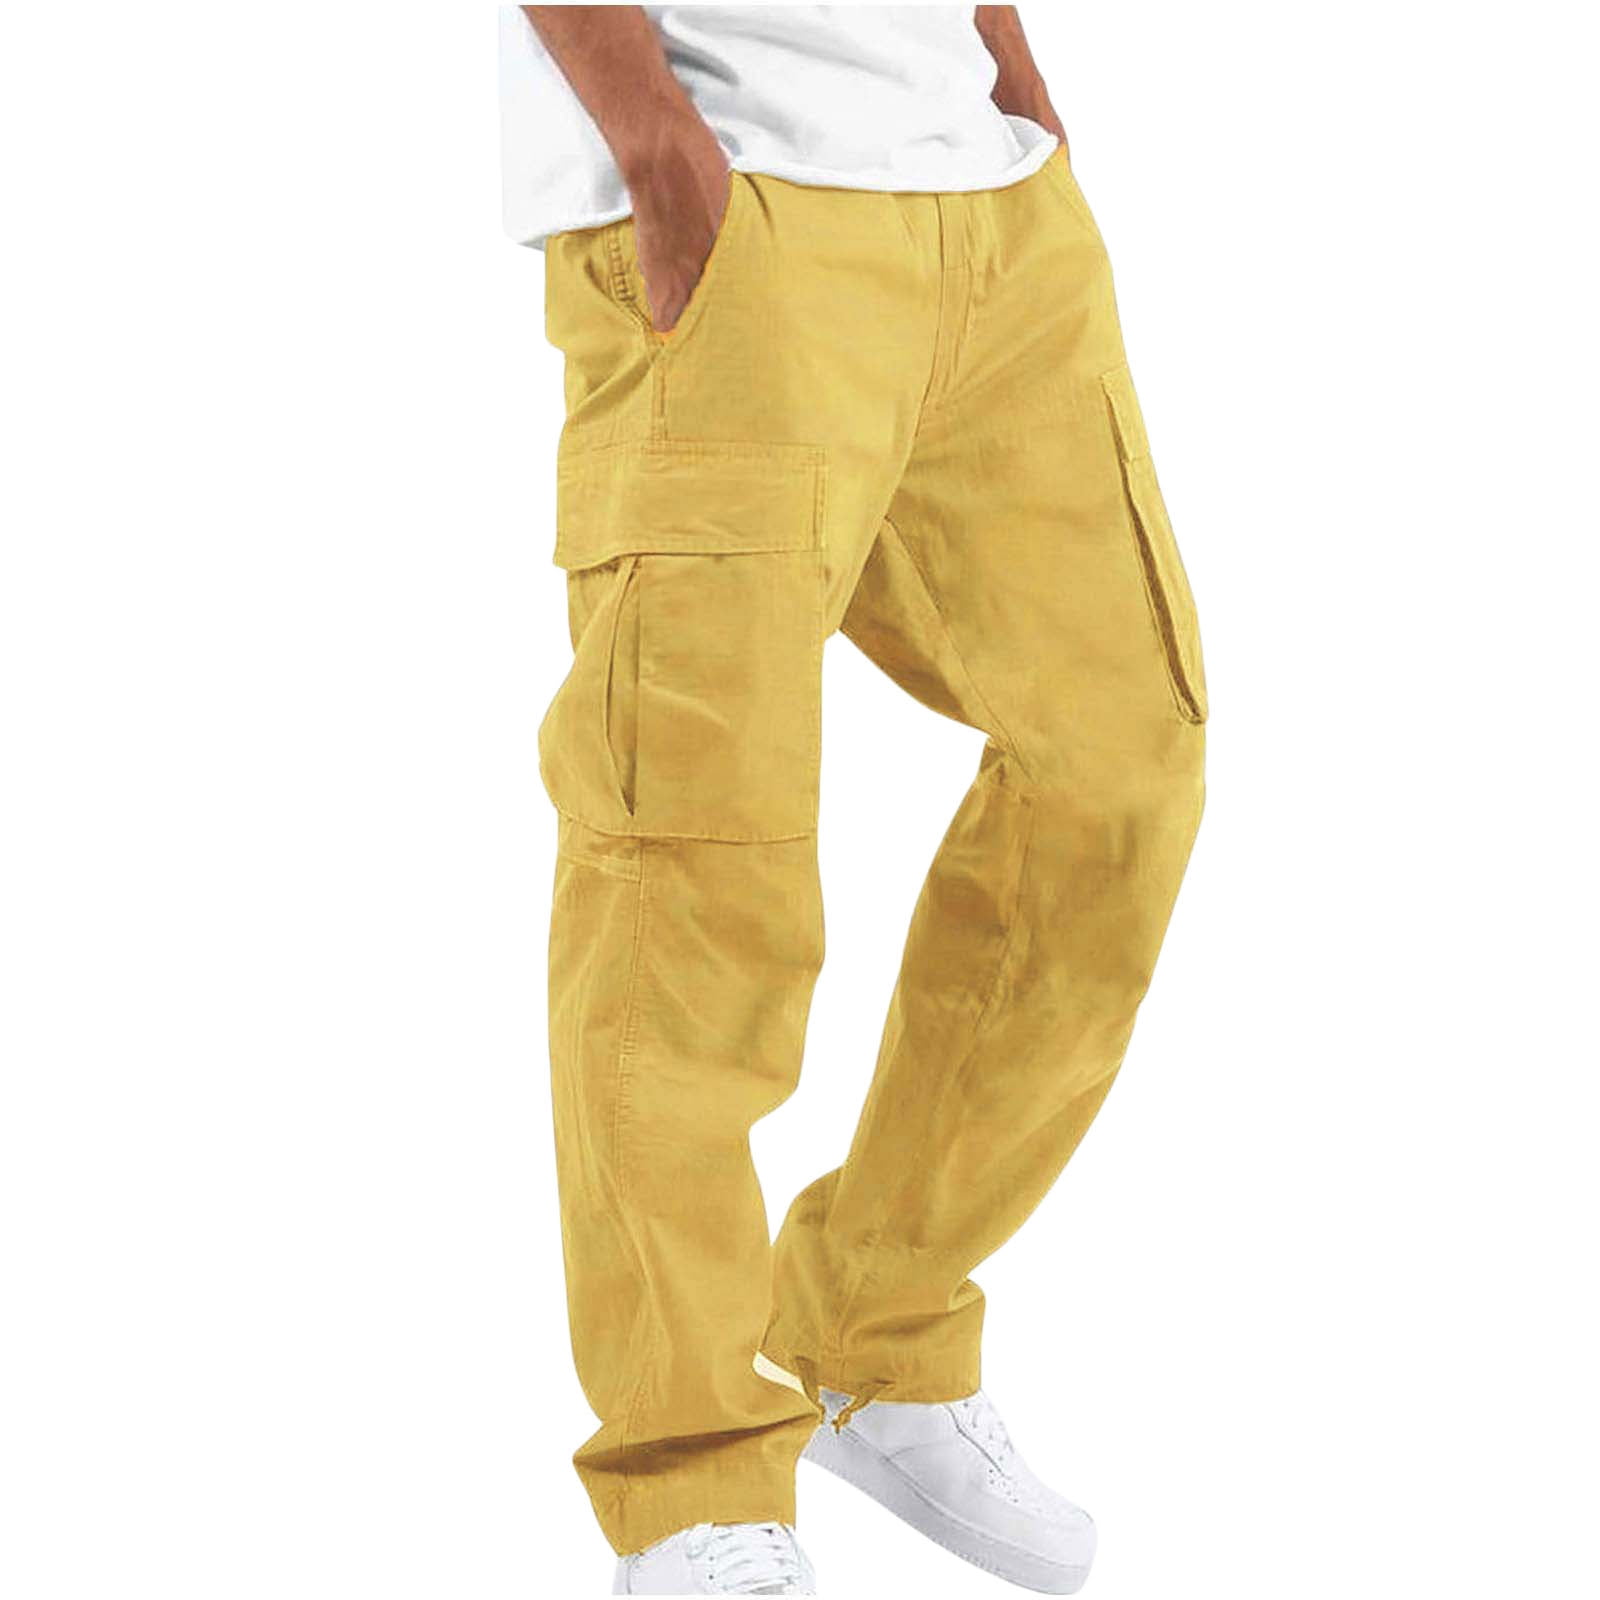 Buy Navy Relaxed Fit Trouser Online – Urban Monkey®